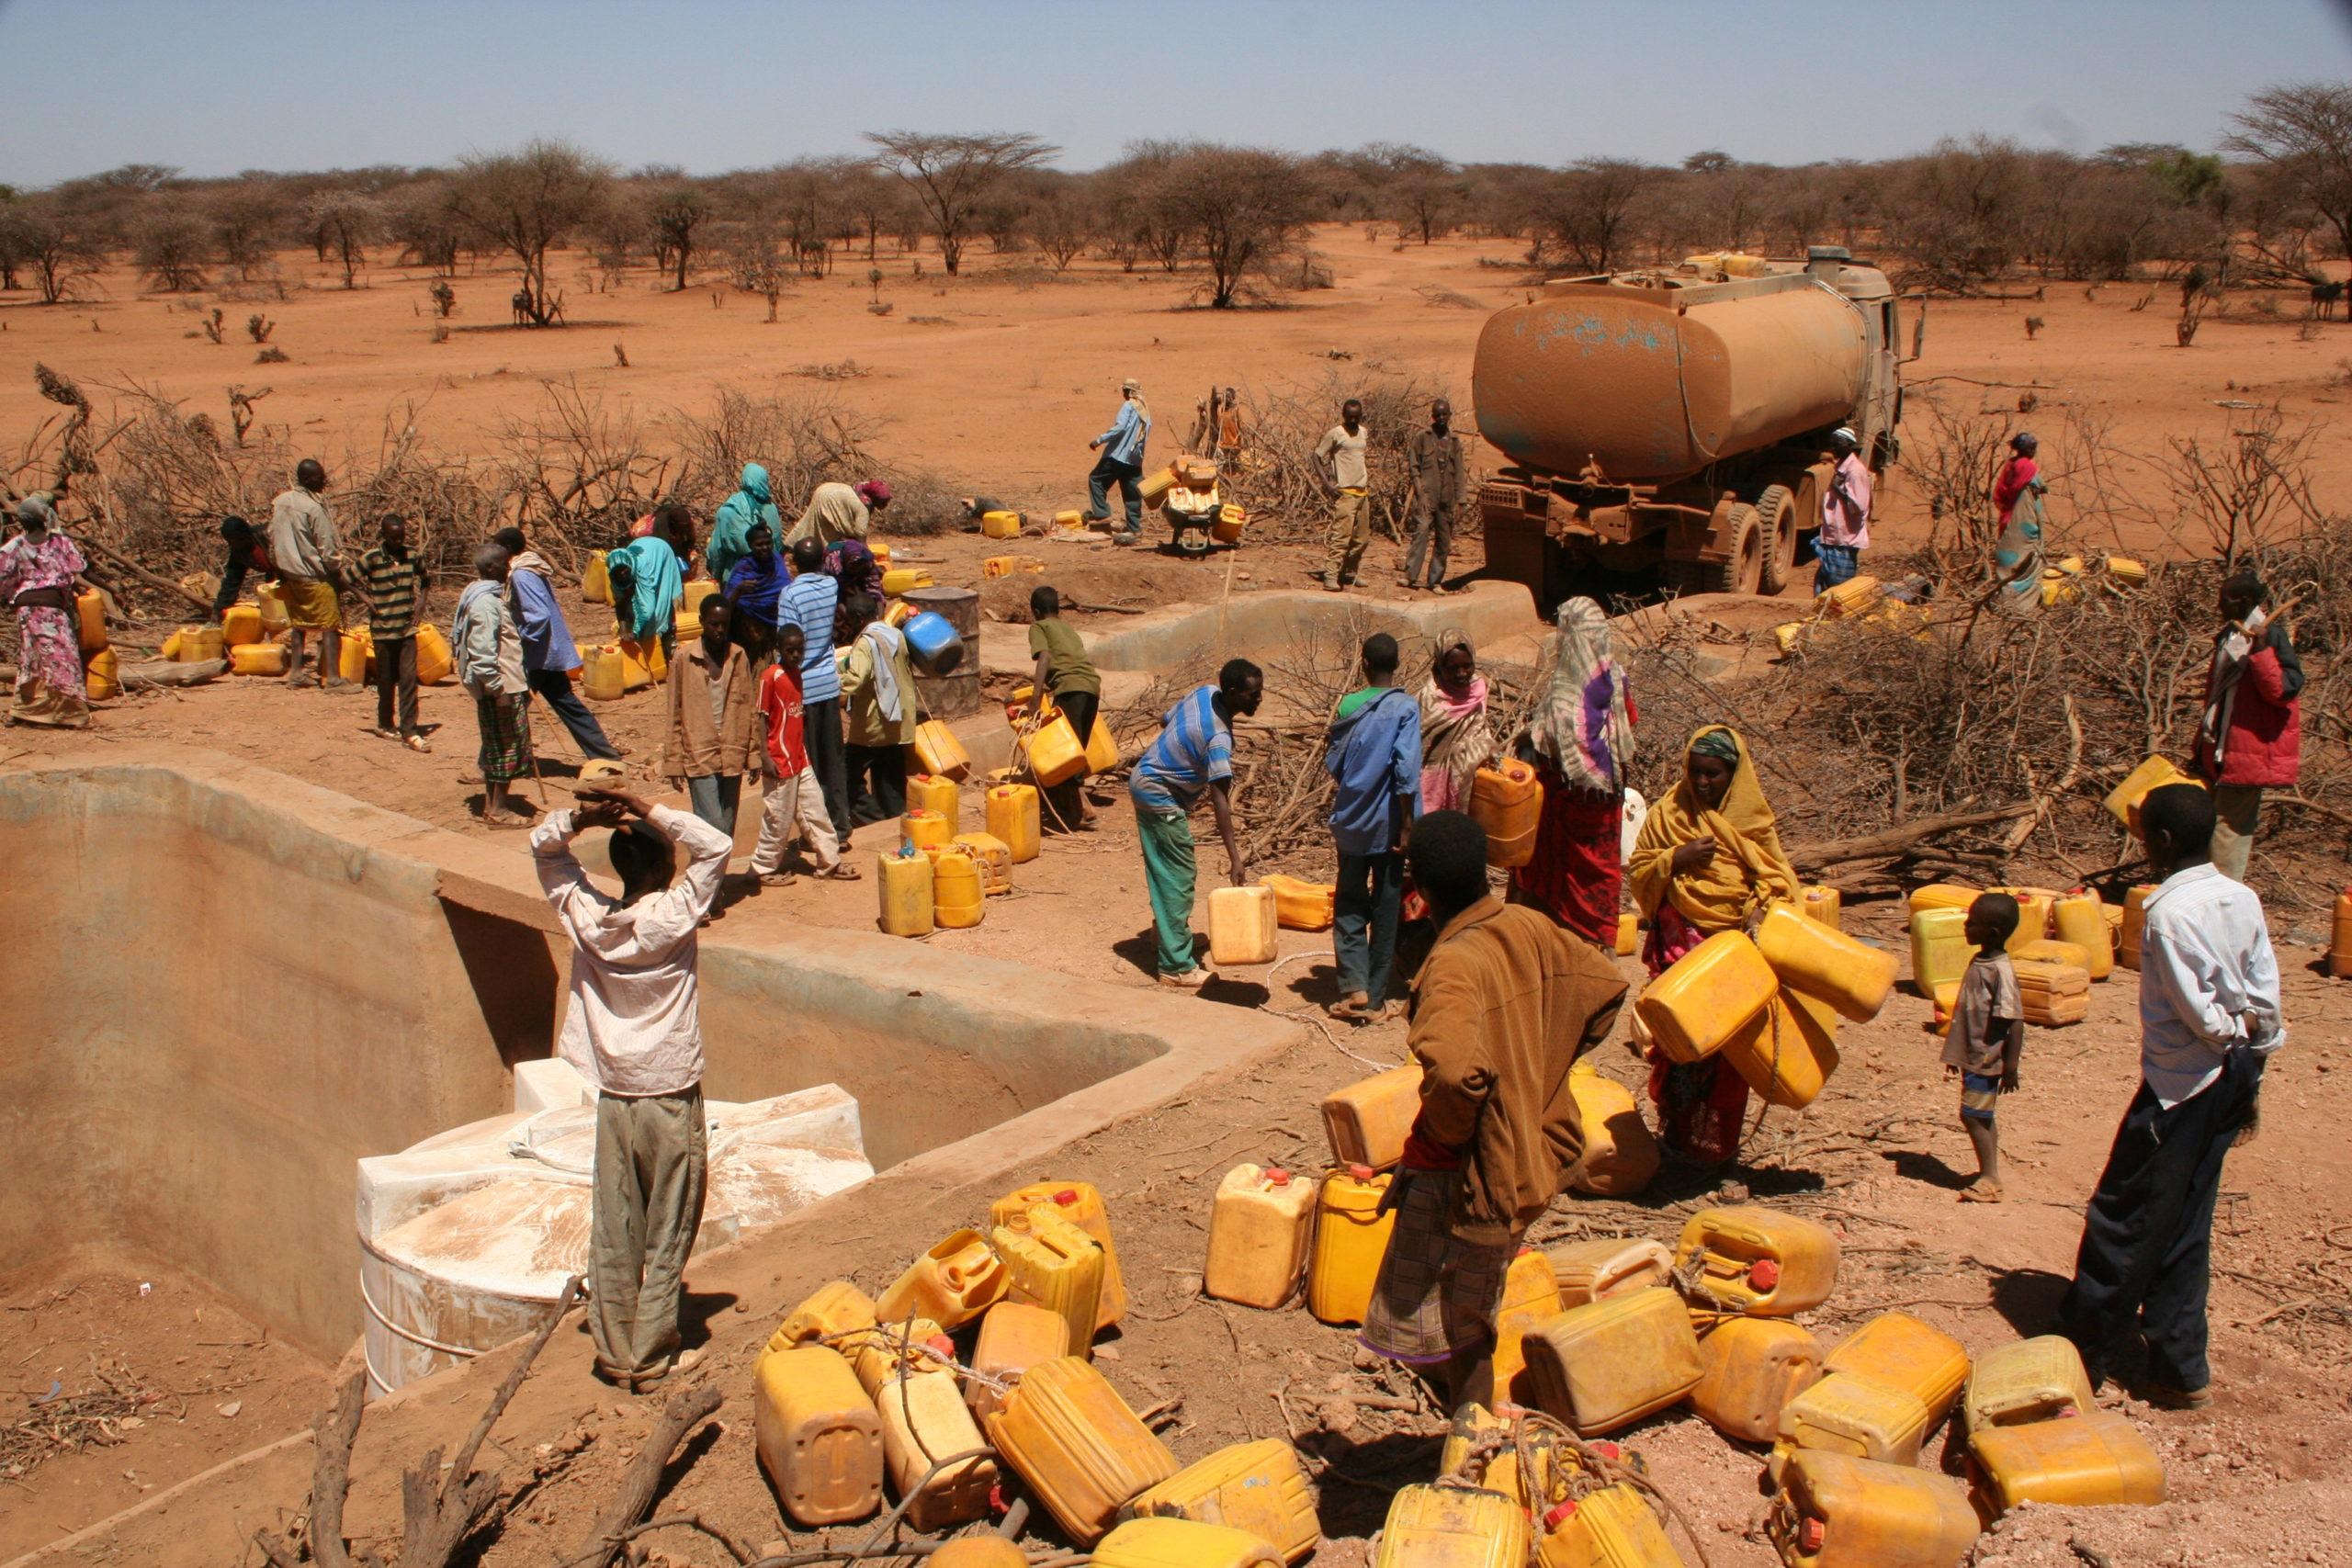 A dried up water distribution with many people with jerrycans waiting for water